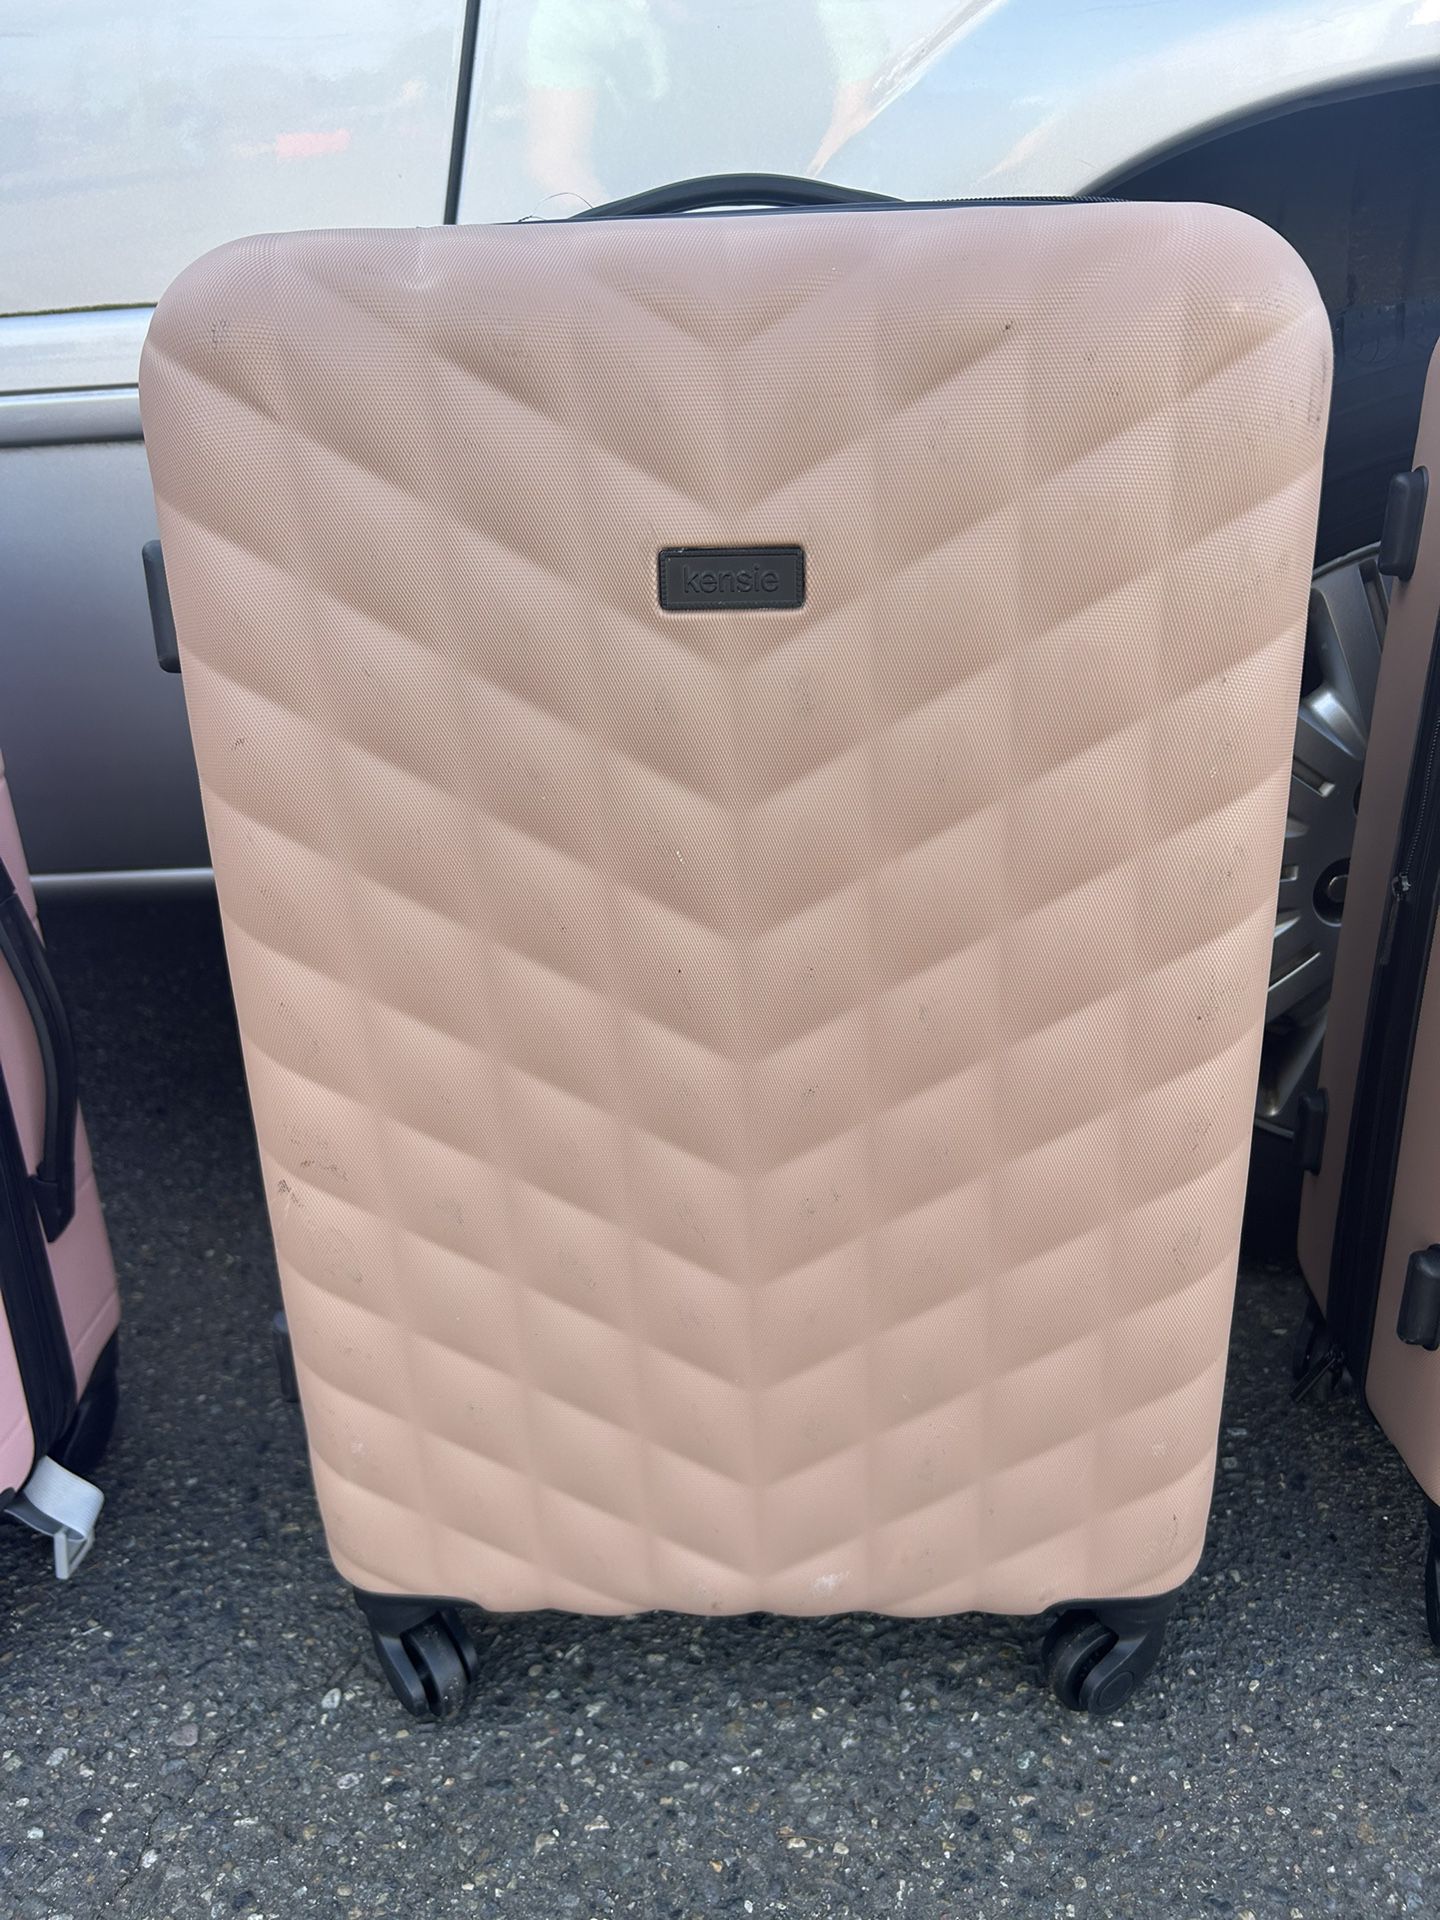 Two Identical Pink Medium sized Check in Suitcase Luggage (2)